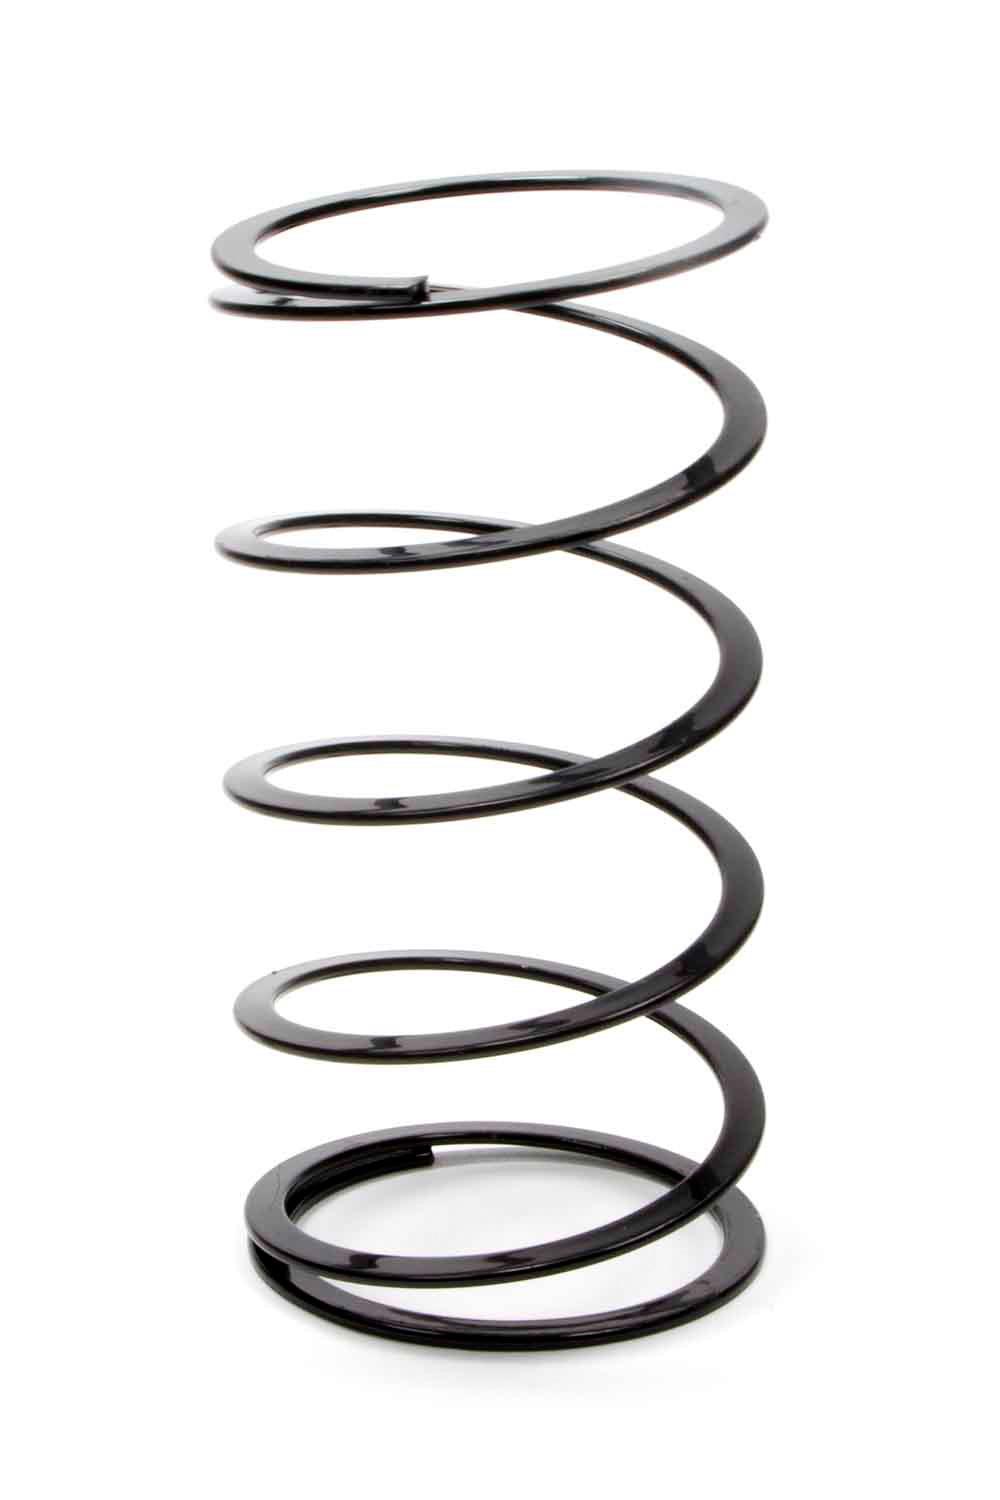 Take Up Spring Coil-Over - Burlile Performance Products